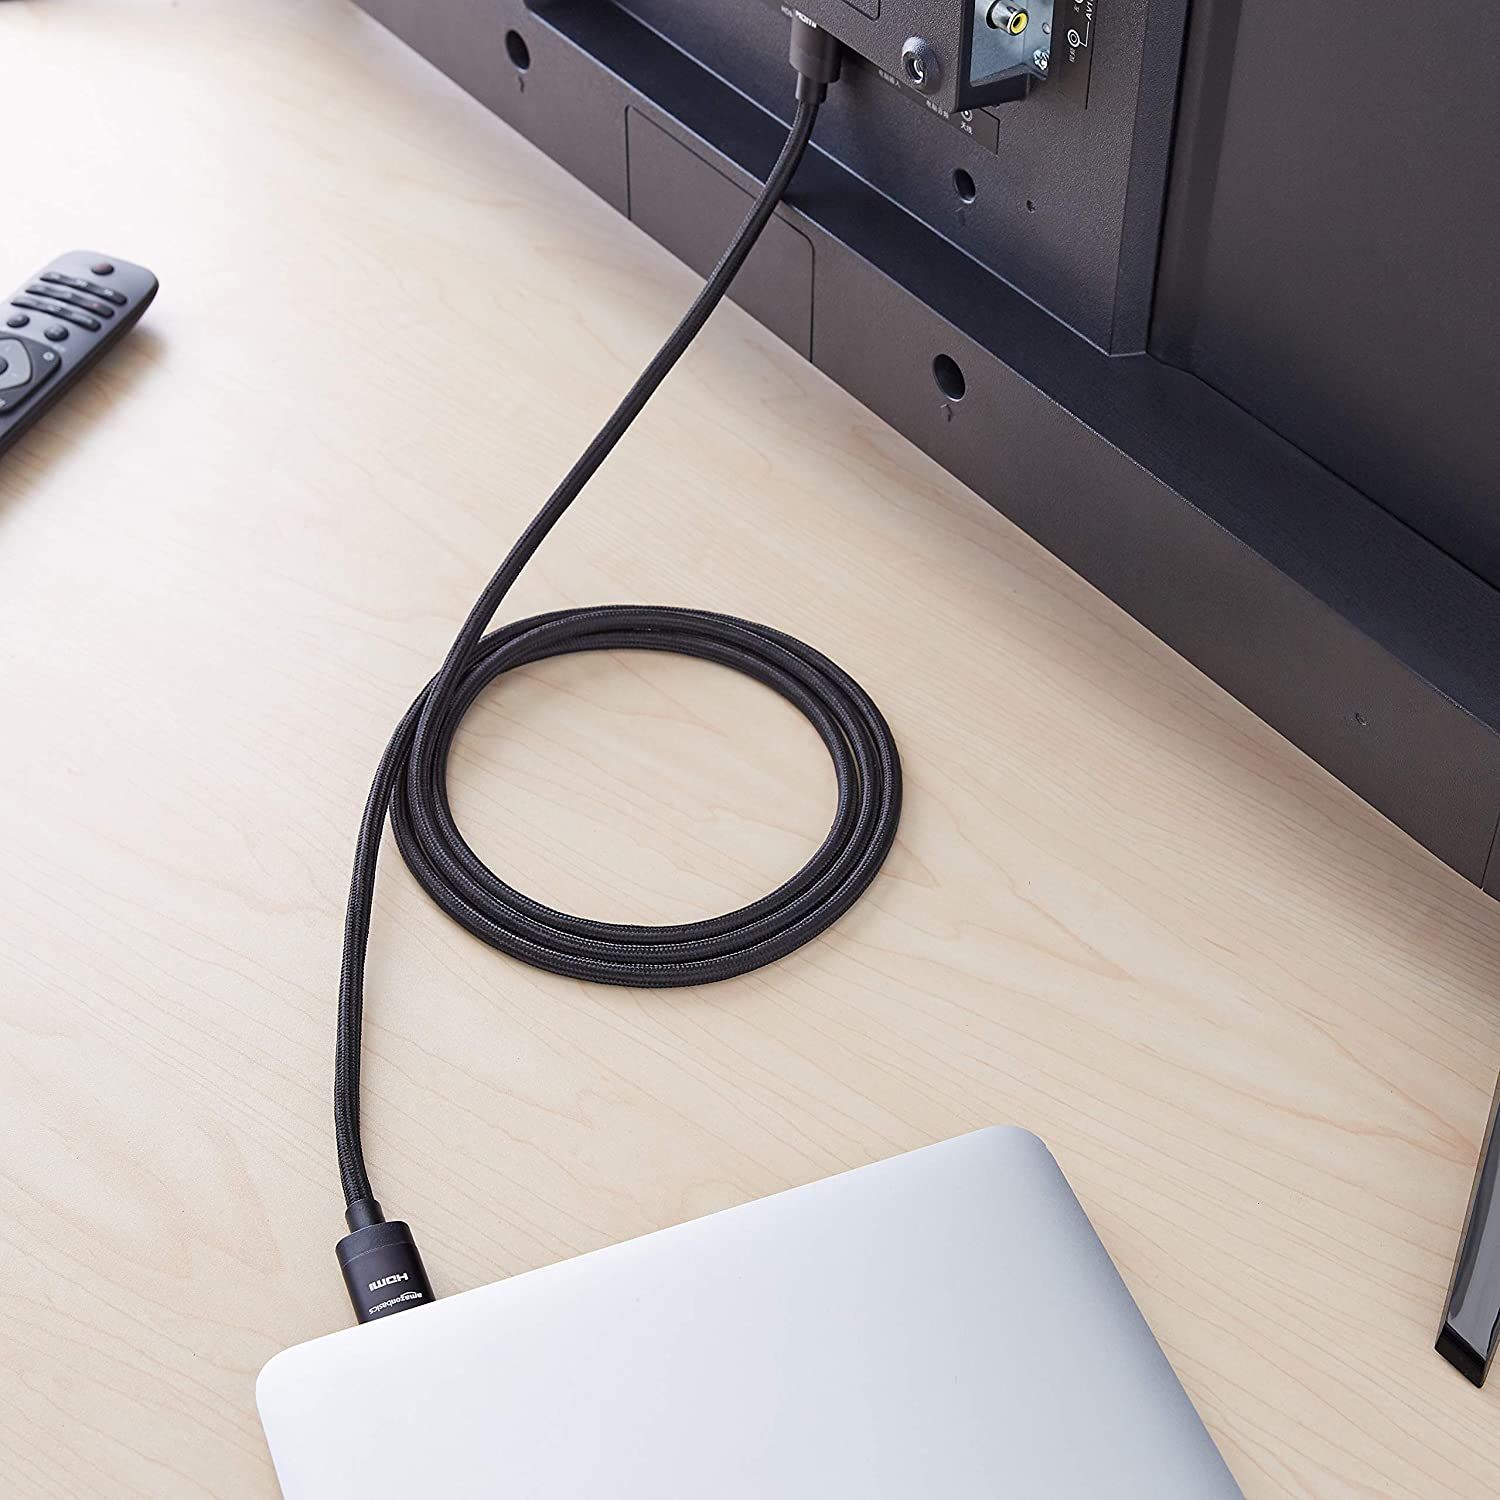 Amazon Basics Premium-Certified Braided HDMI Cable with a TV